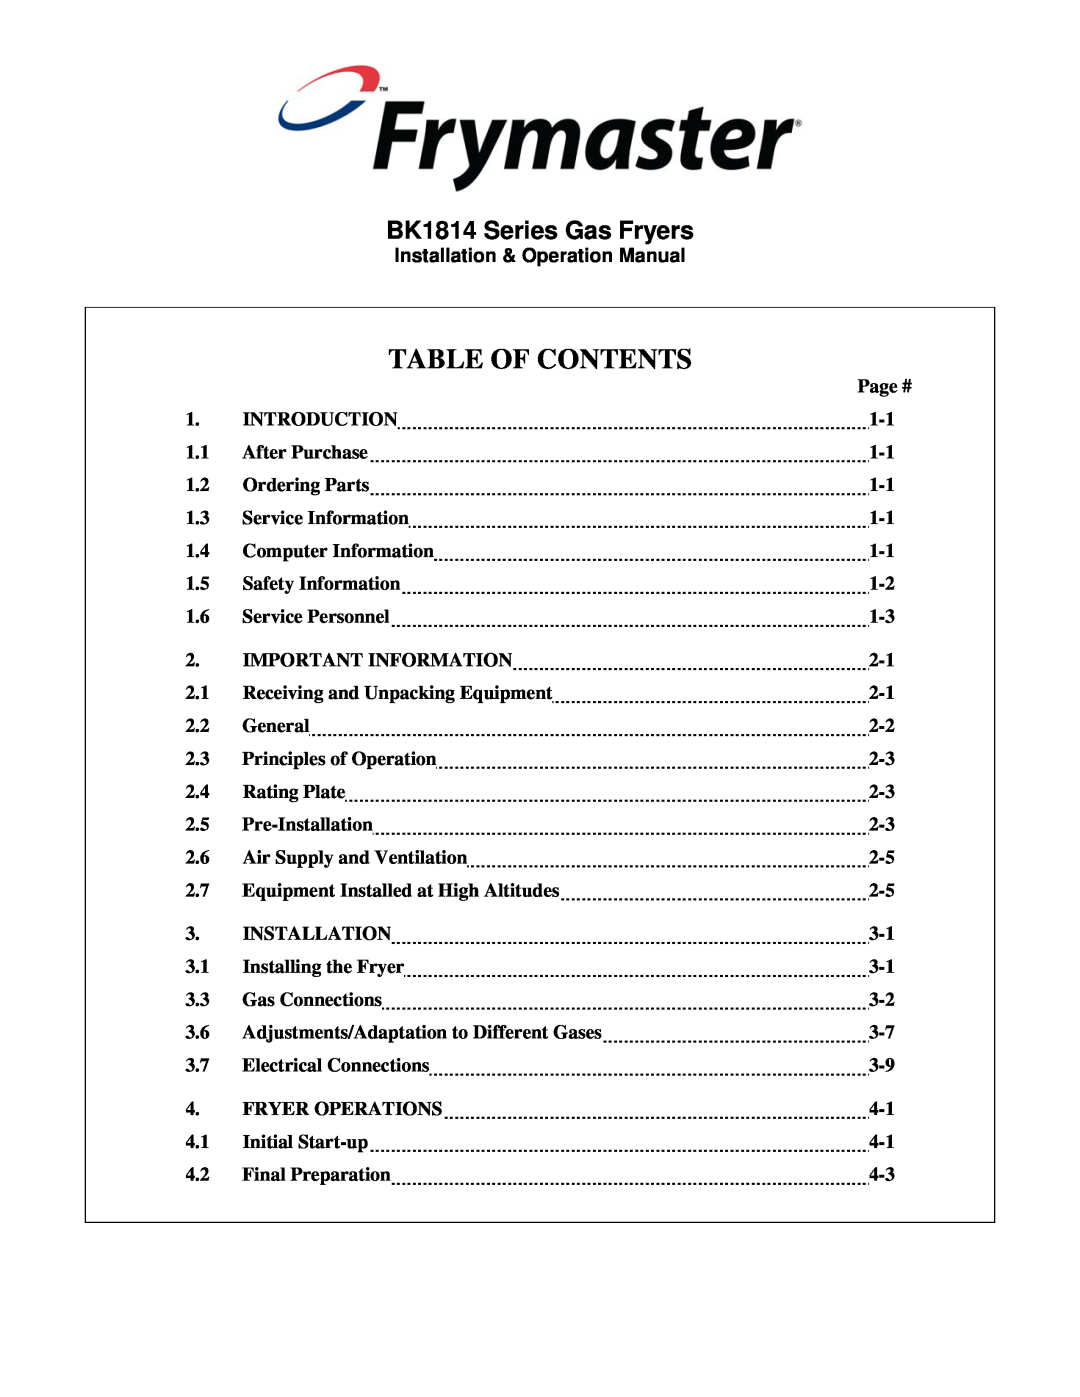 Frymaster operation manual Table Of Contents, BK1814 Series Gas Fryers 